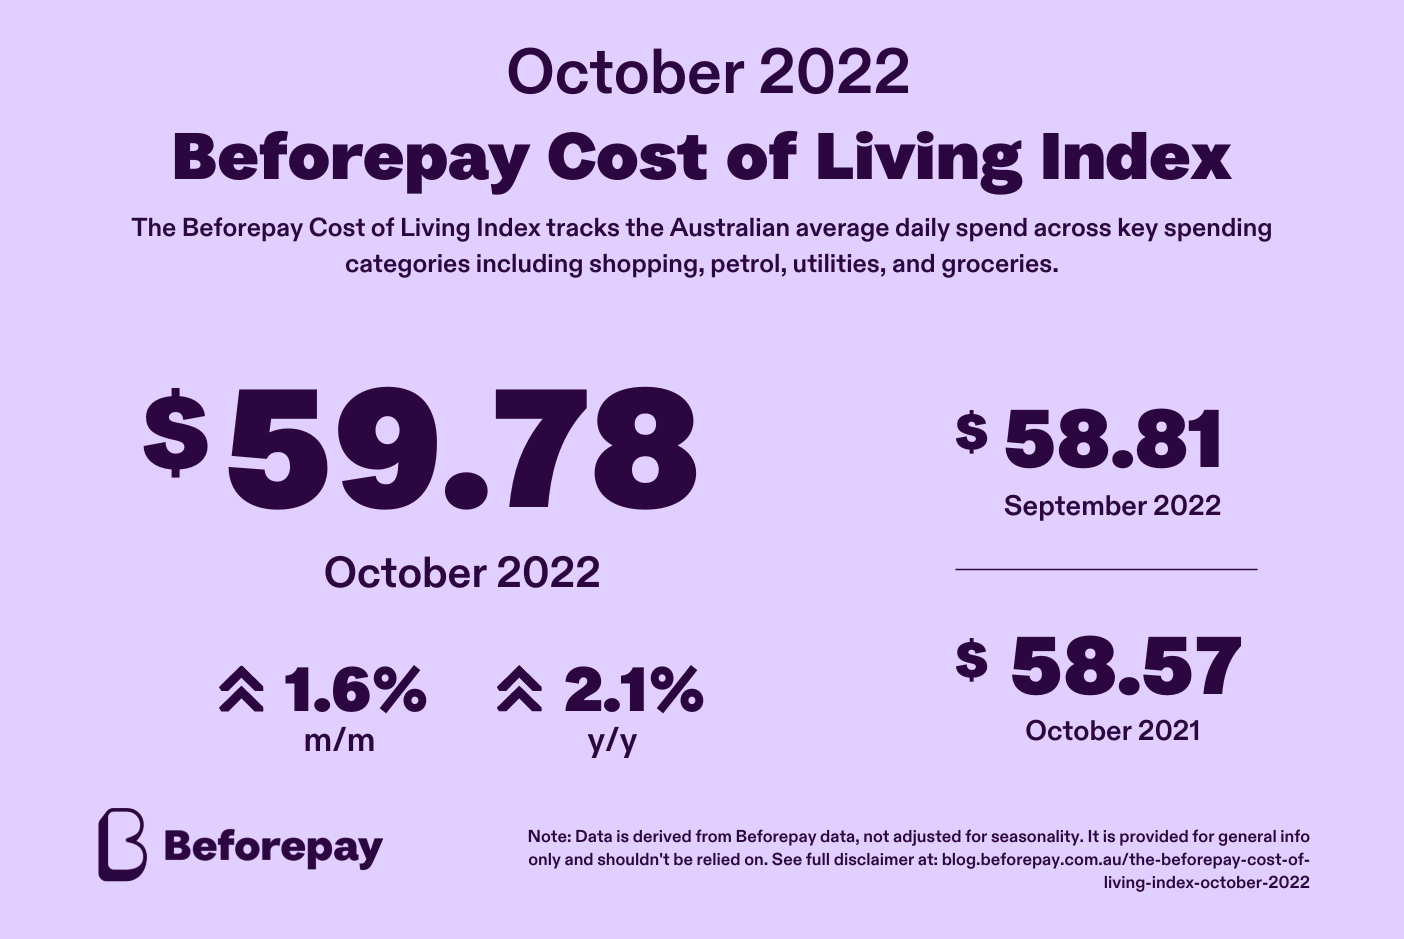 The Beforepay Cost of Living Index for October 2022 is $59.78.